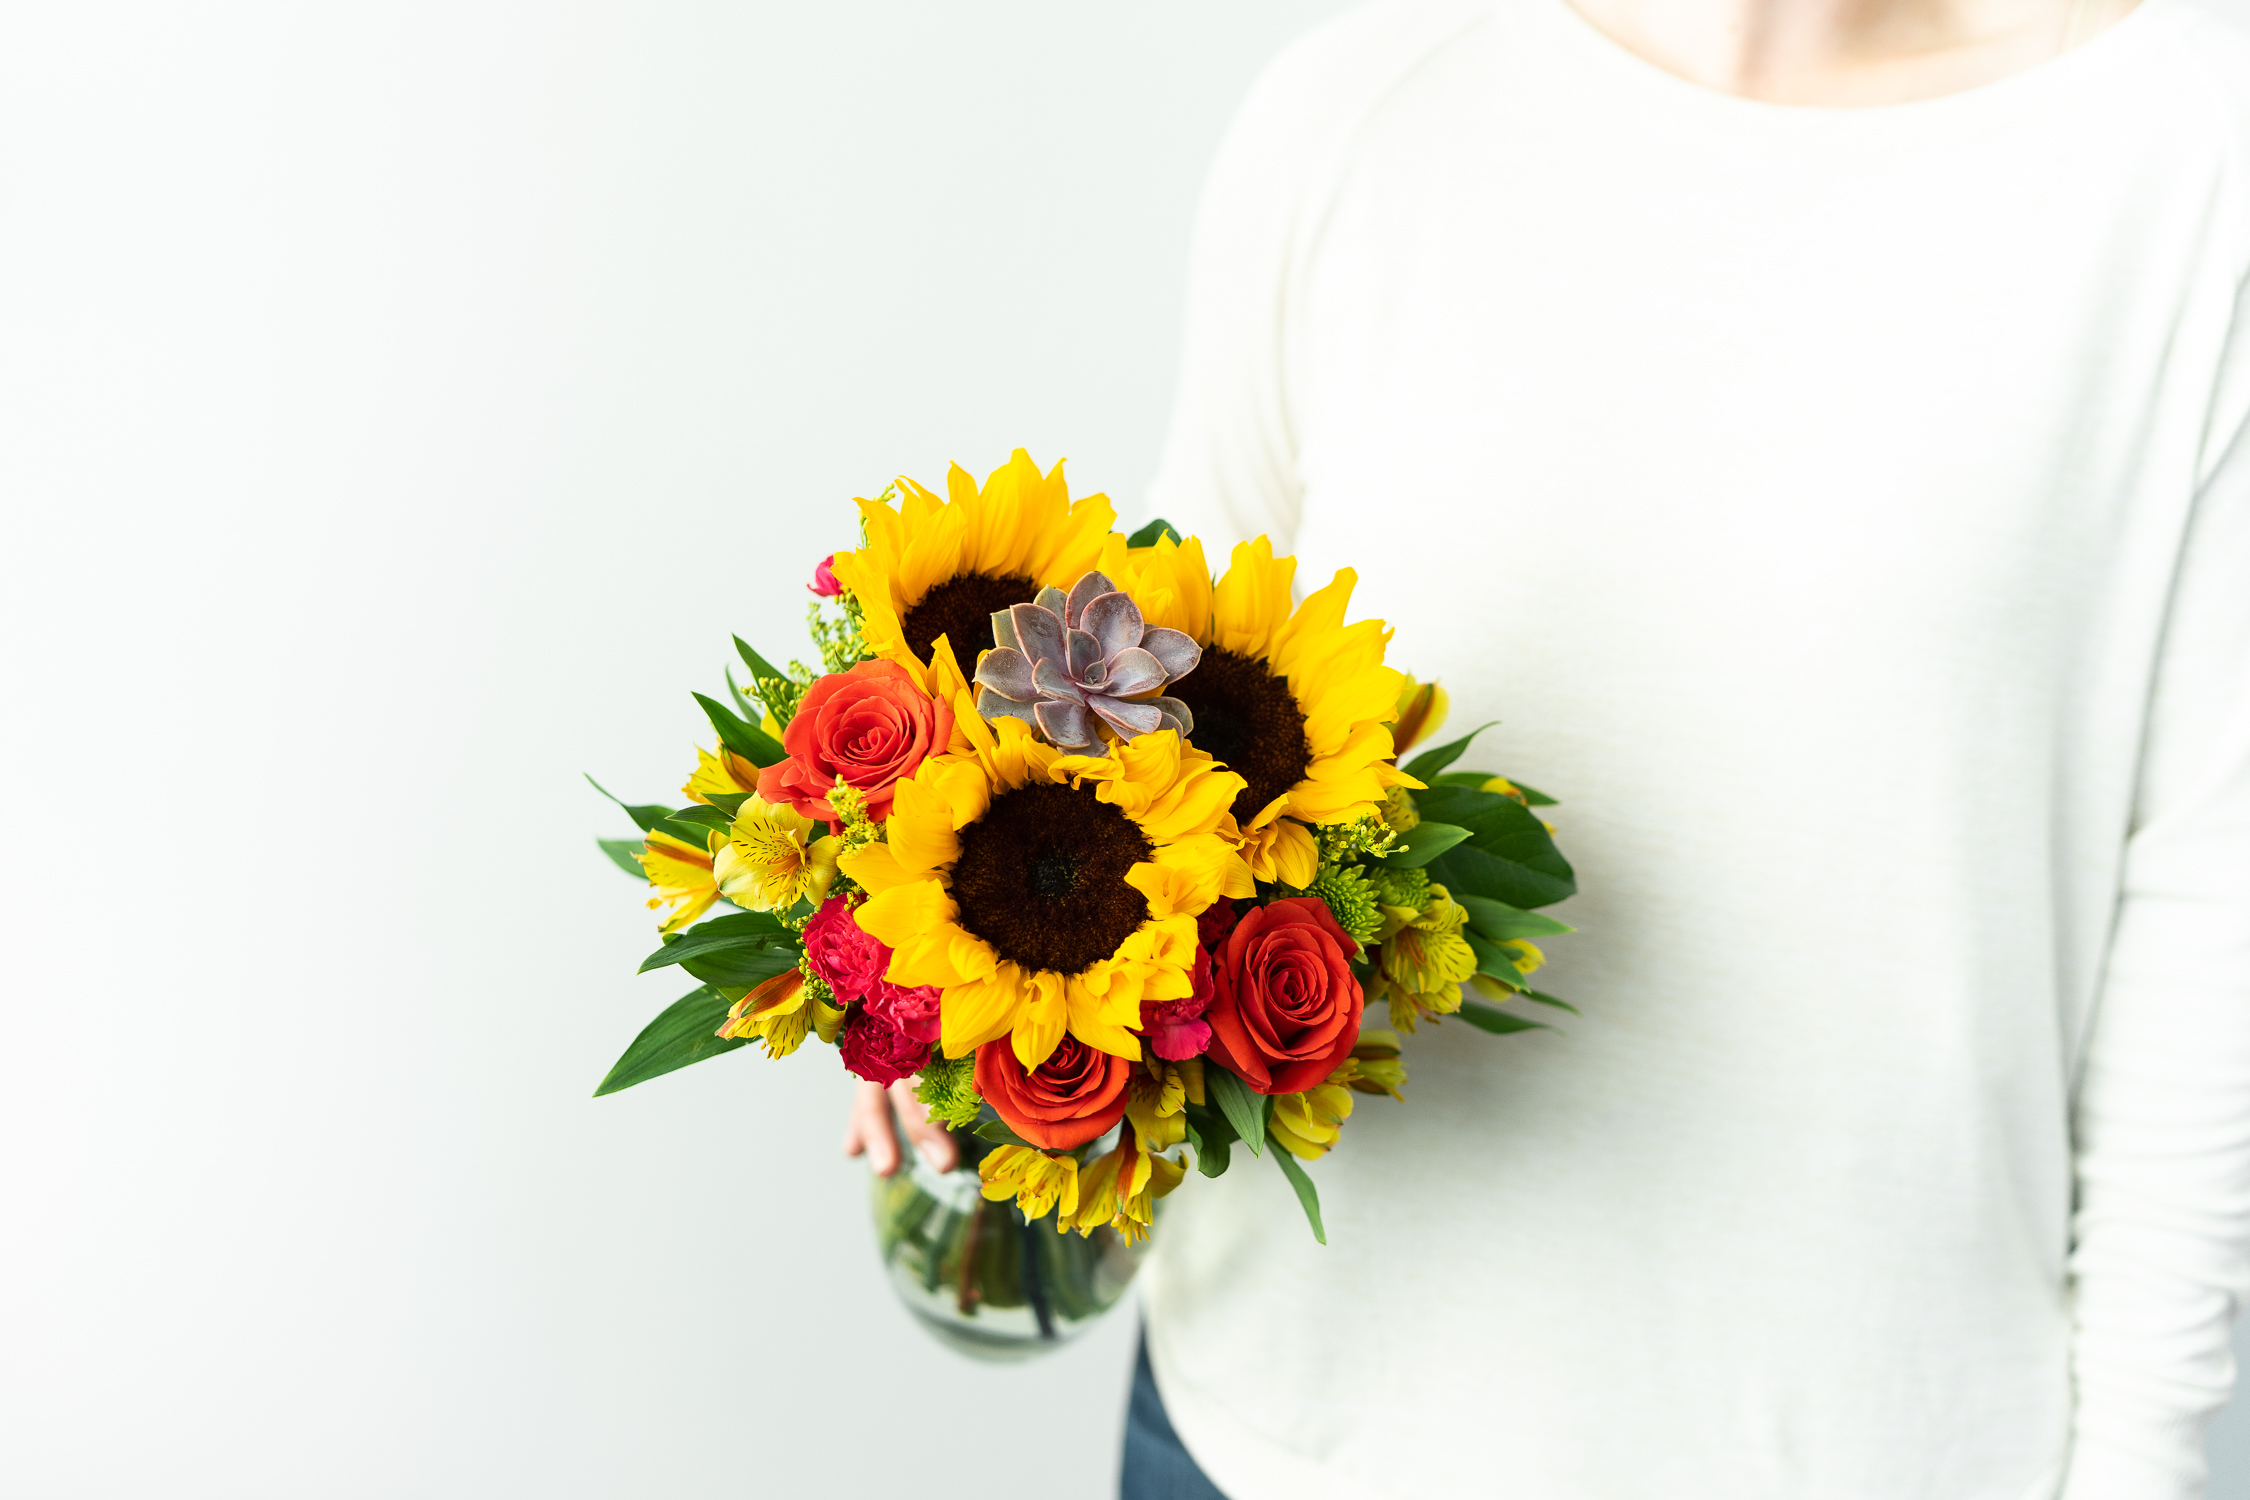 Woman Holding Sunflower and Succulent Bouquet